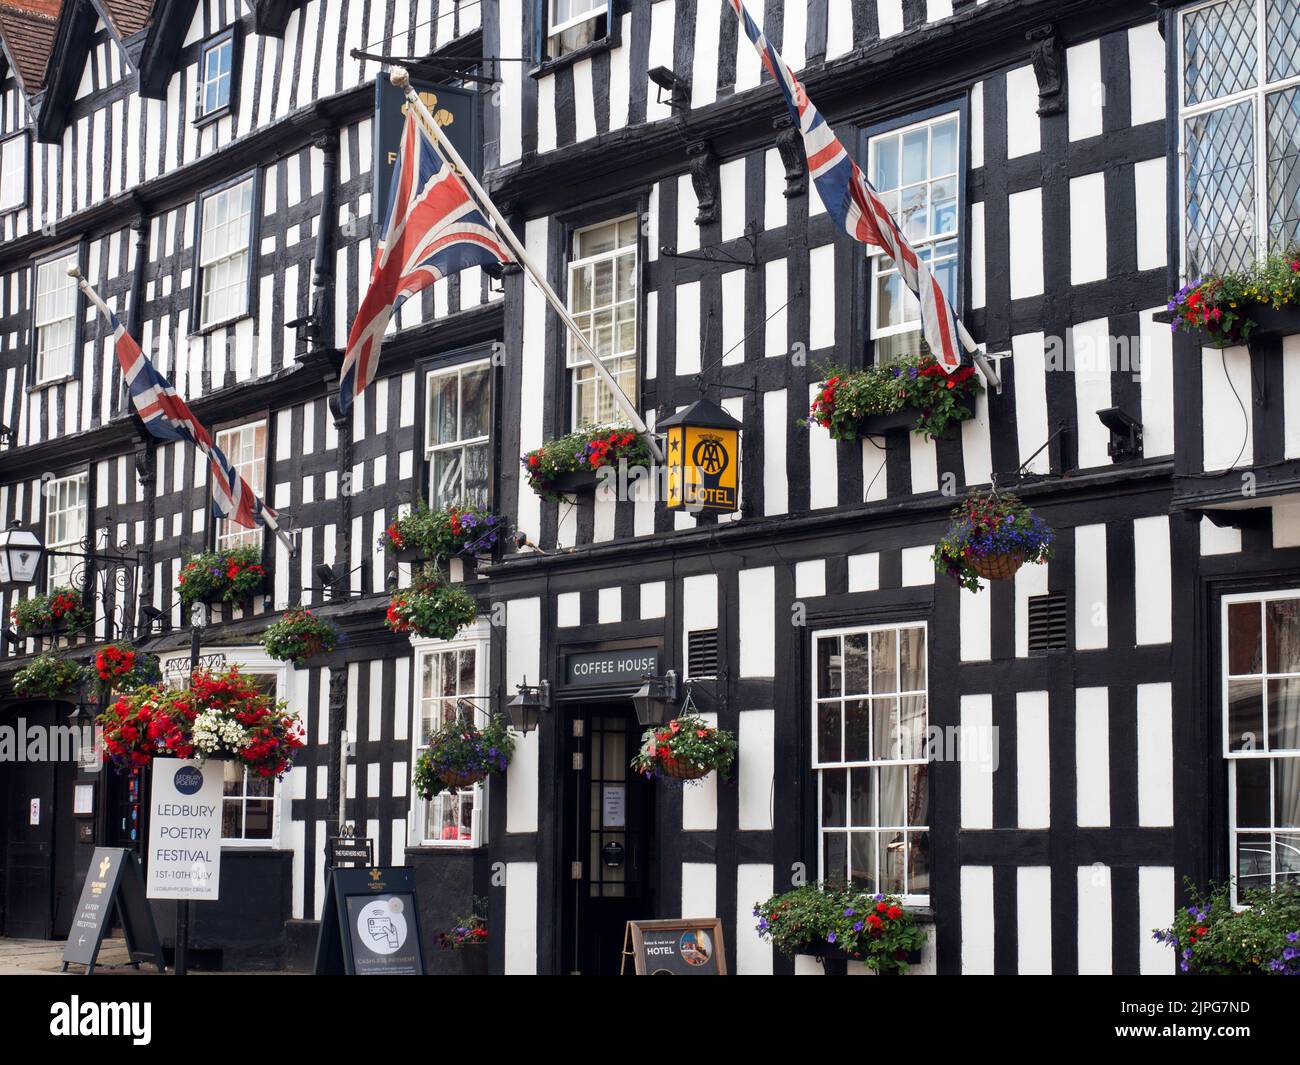 The Feathers Hotel timber framed building on the High Street at Ledbury Herefordshire England Stock Photo